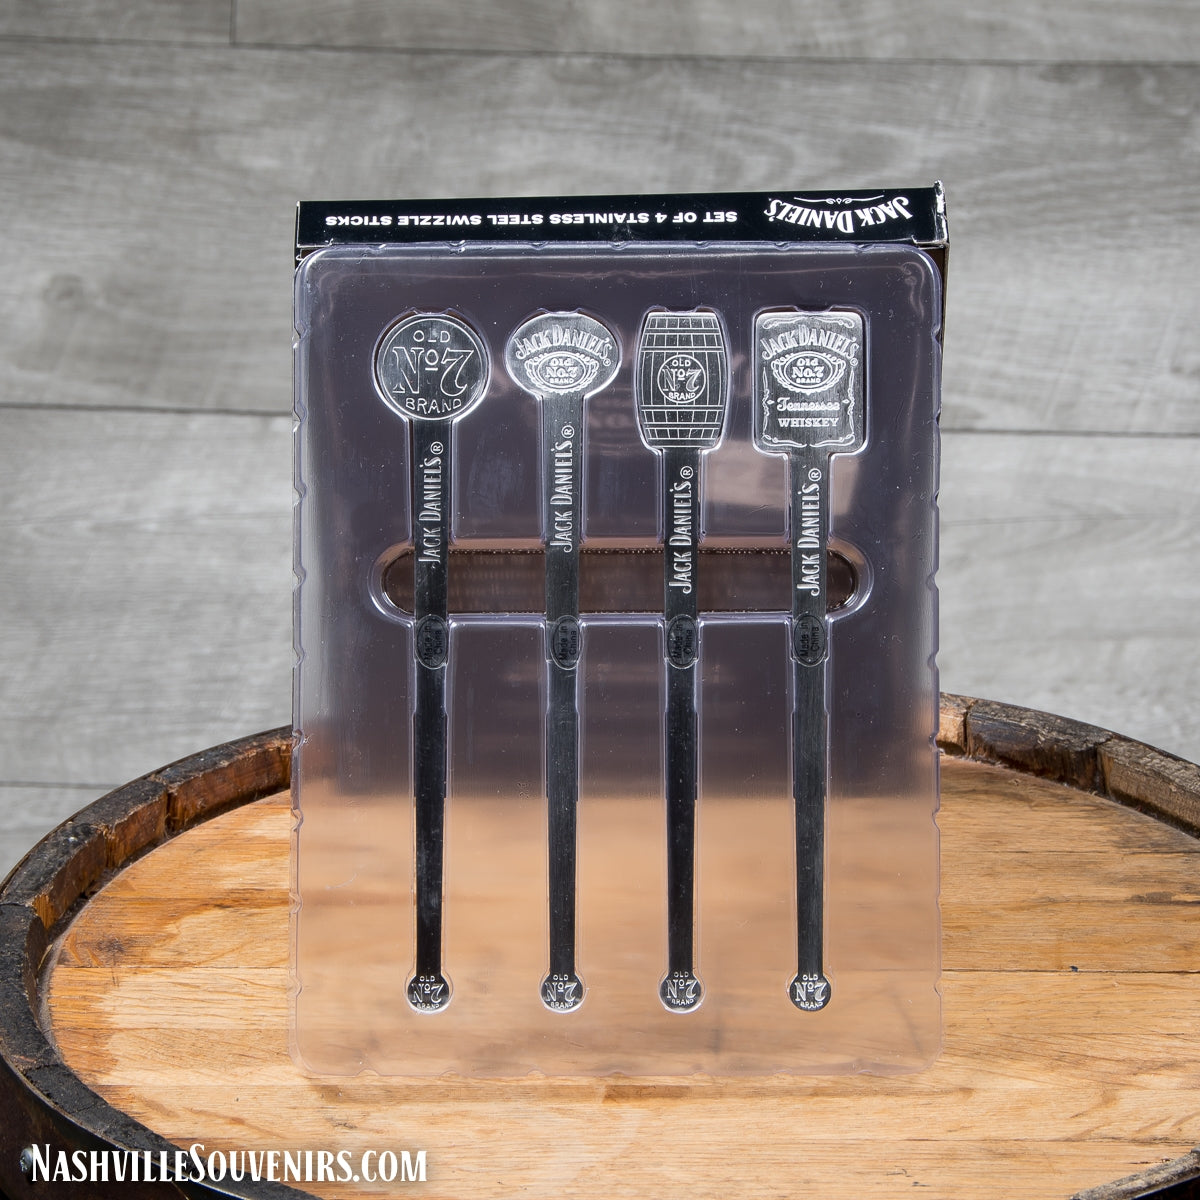 Set of 4 Officially licensed Jack Daniels Stainless Steel Swizzle Sticks. FREE SHIPPING on all US orders over $75!